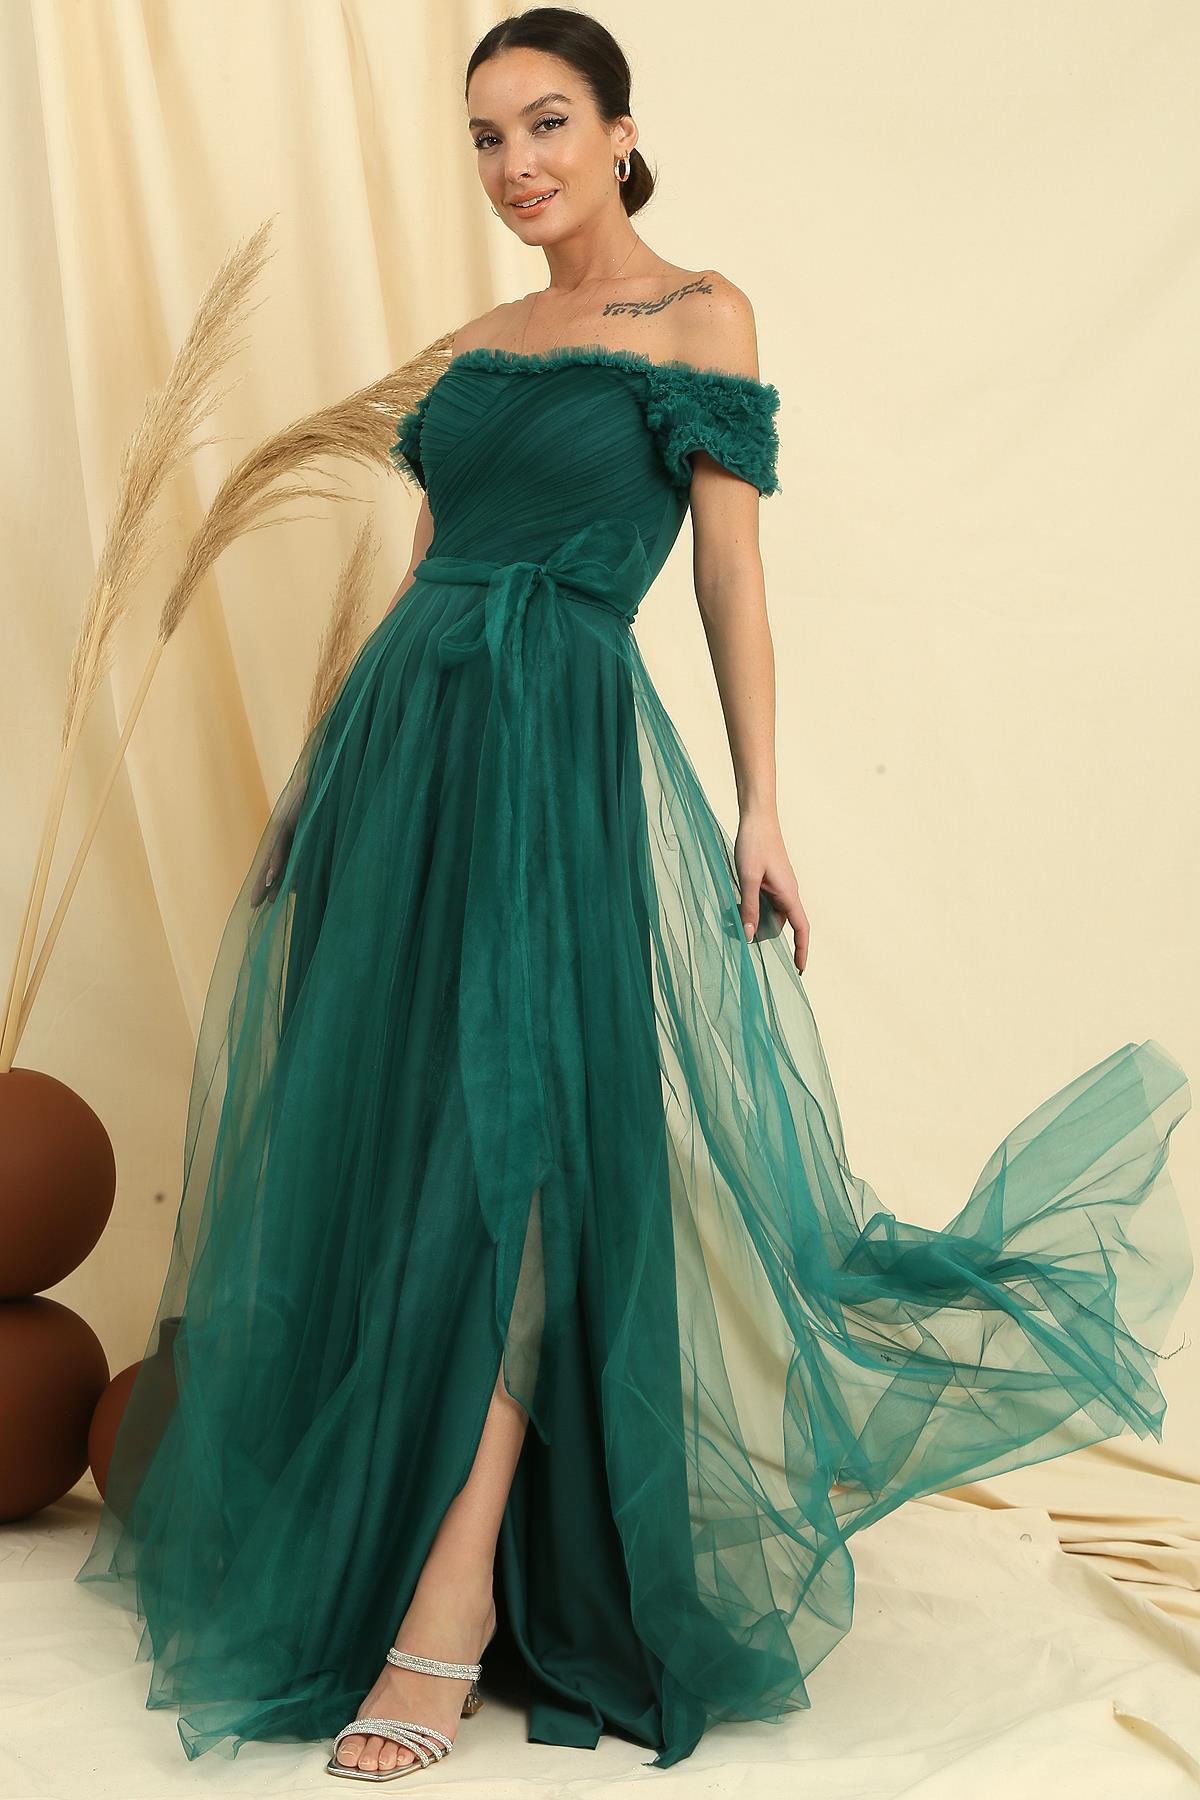 Levně By Saygı Frilly Belted Collar And Sleeves Lined Long Tulle Dress